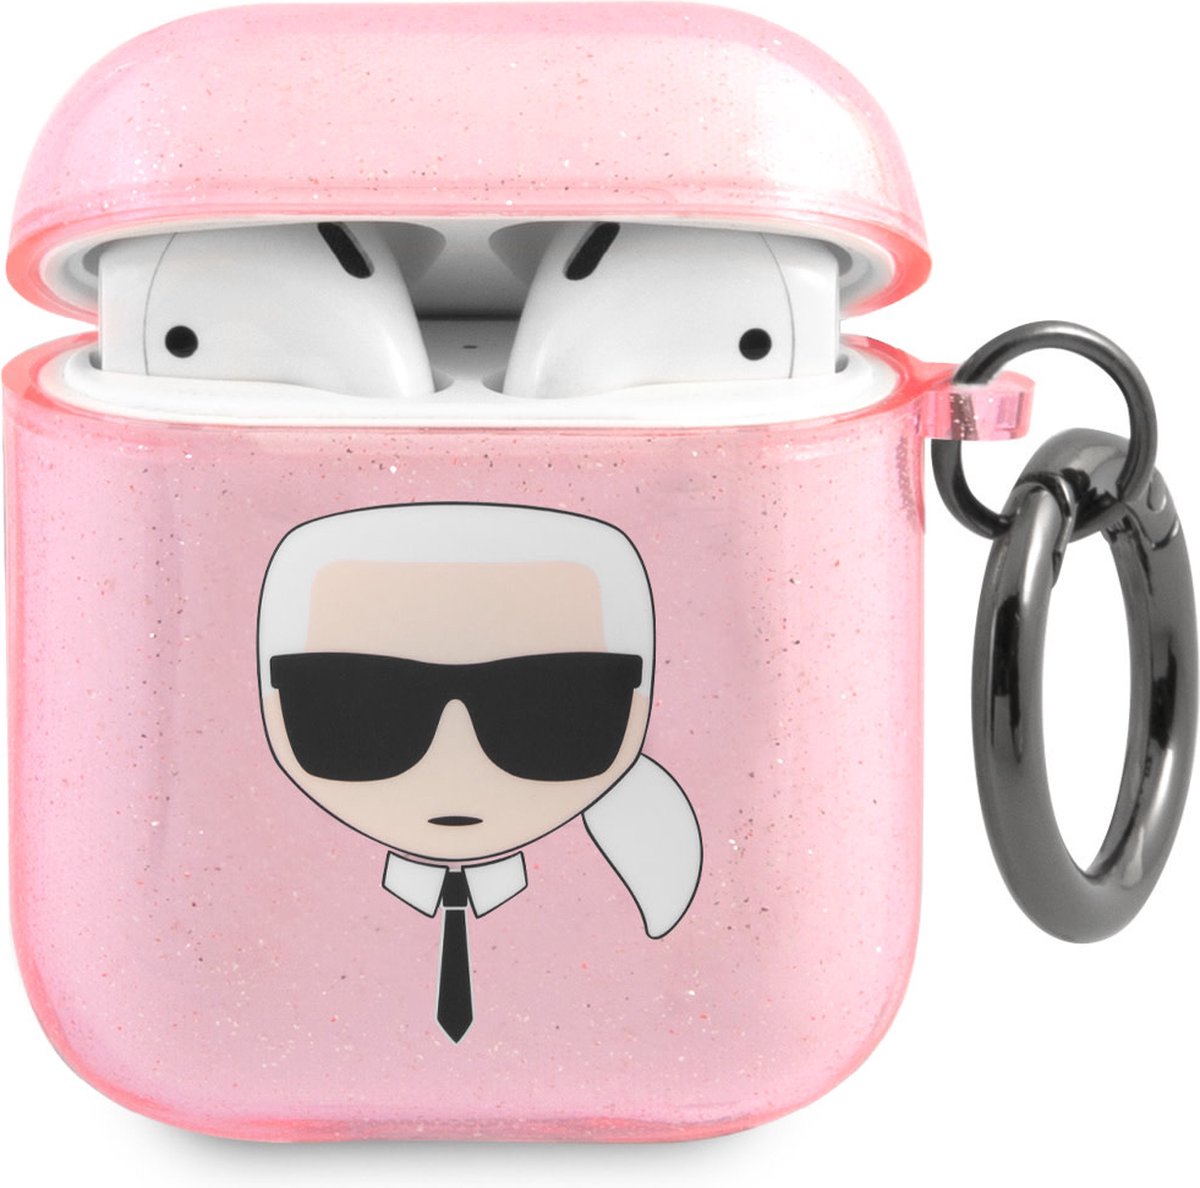 Karl Lagerfeld Airpods - Airpods 2 Case - Glitter - Karl - Roze